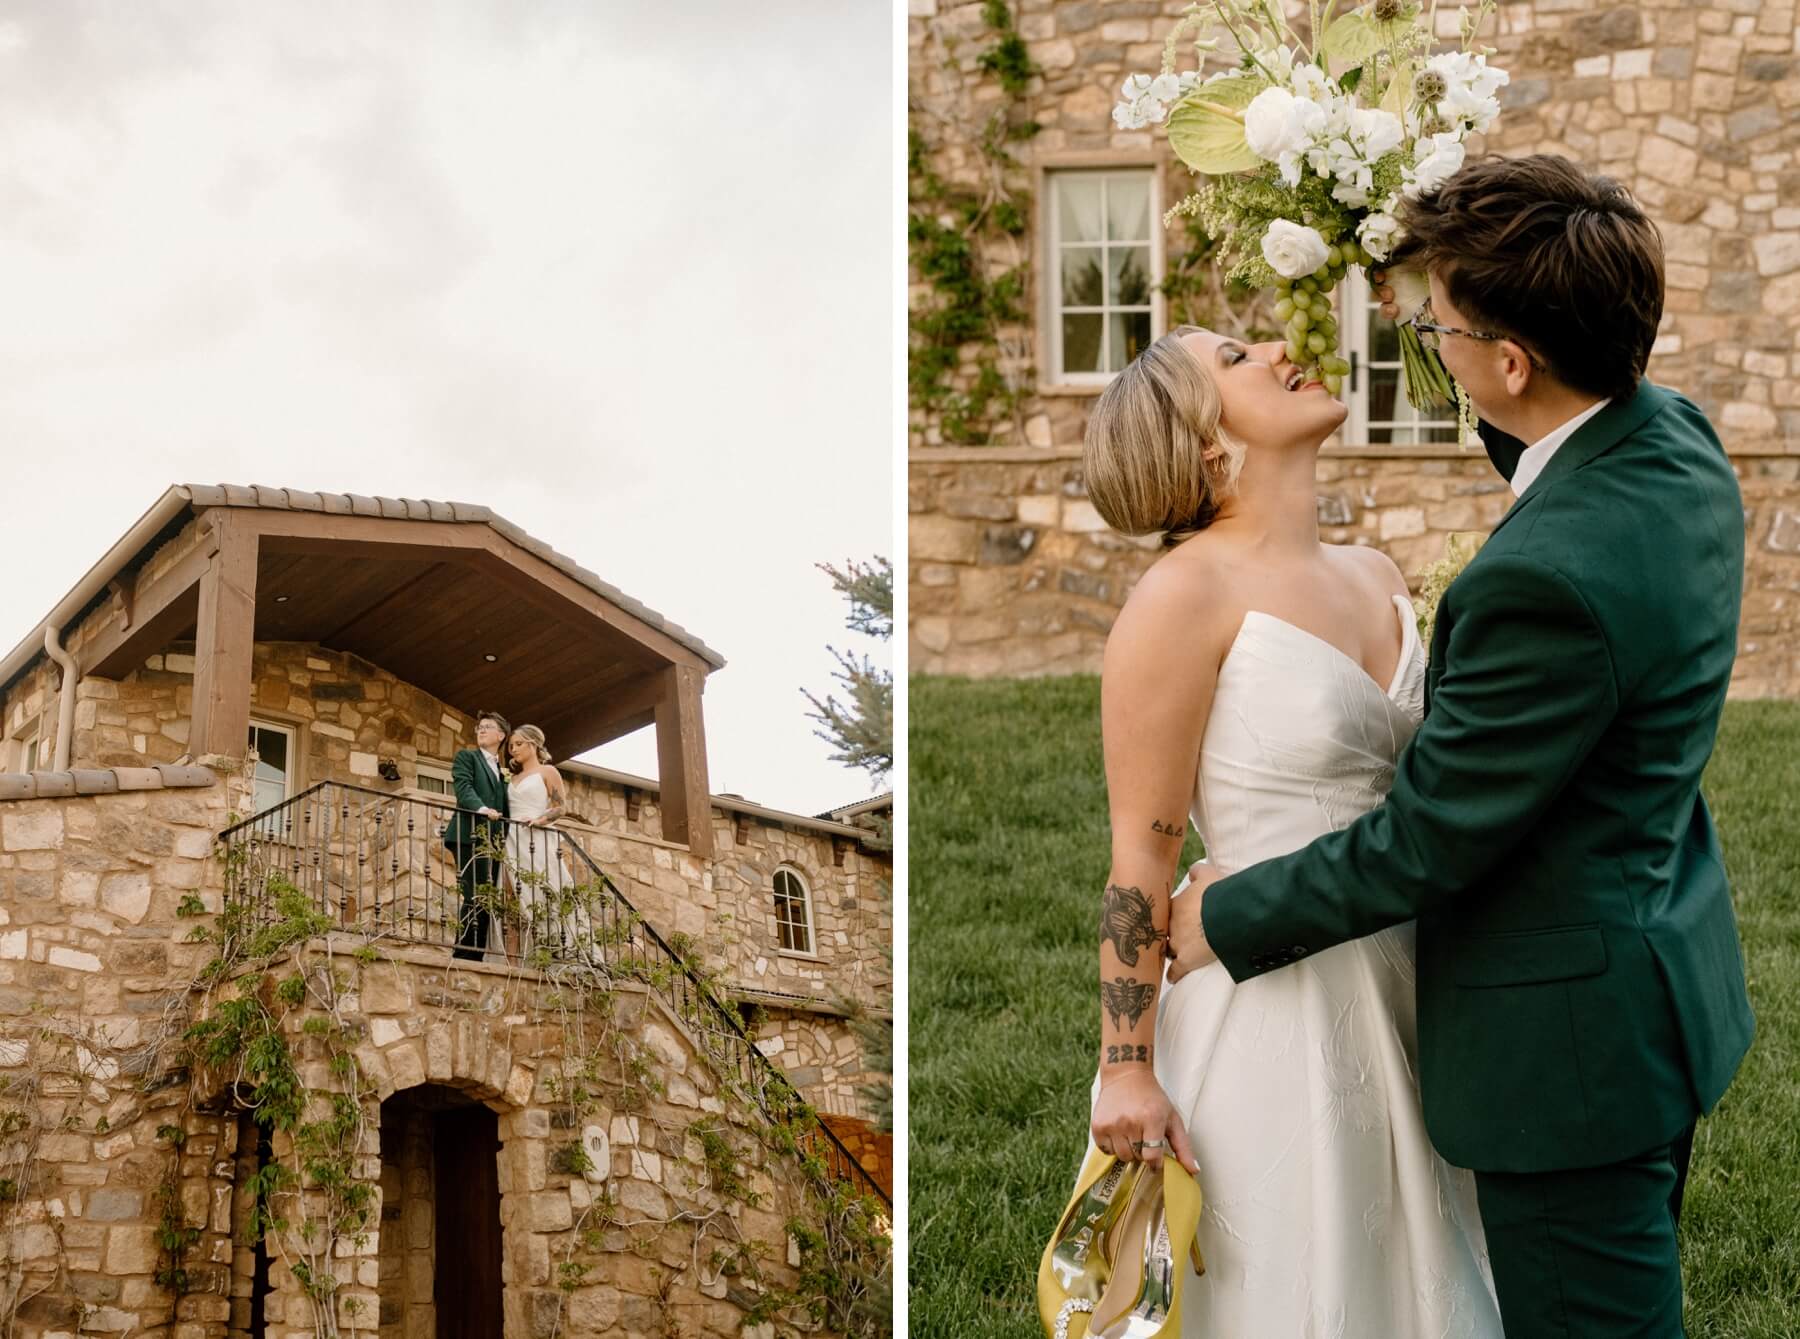 Couple standing on balcony of European inspired home | Partner eating grapes from wedding bouquet that other partner is holding